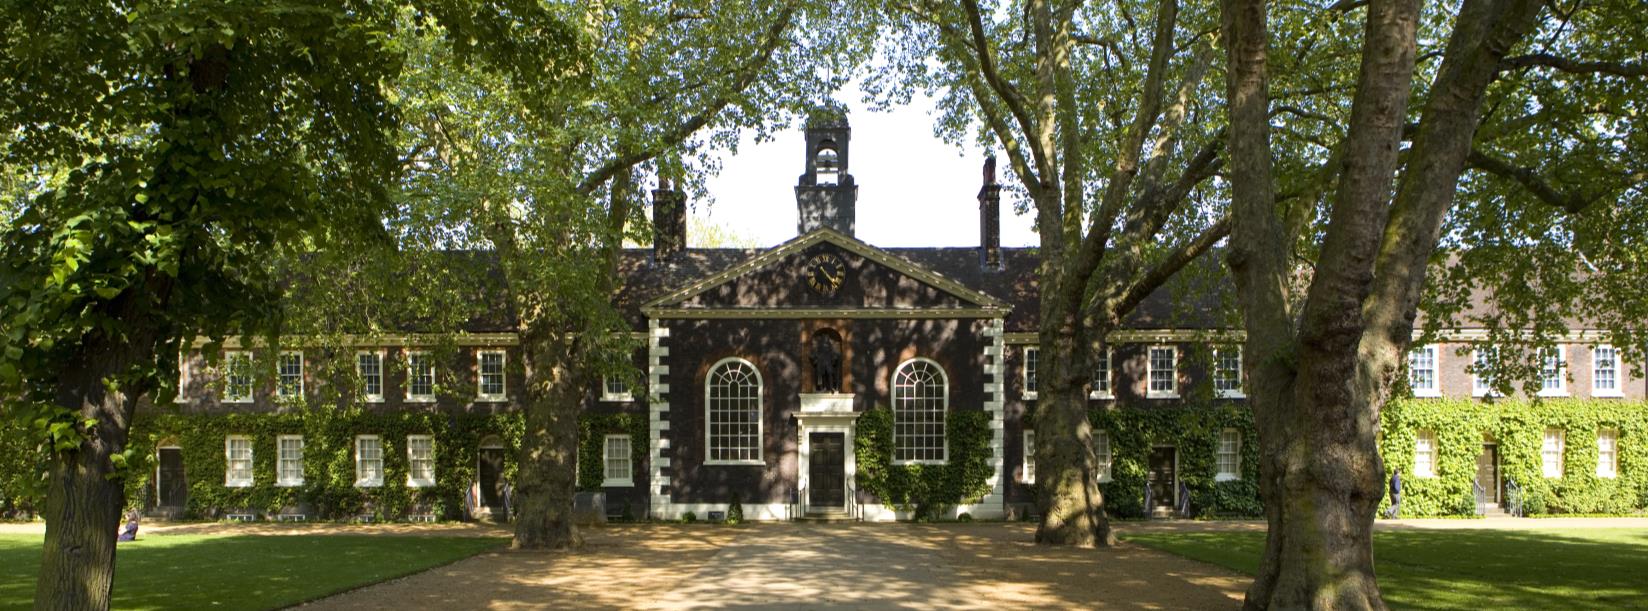 Hoxton’s Museum Of the Home